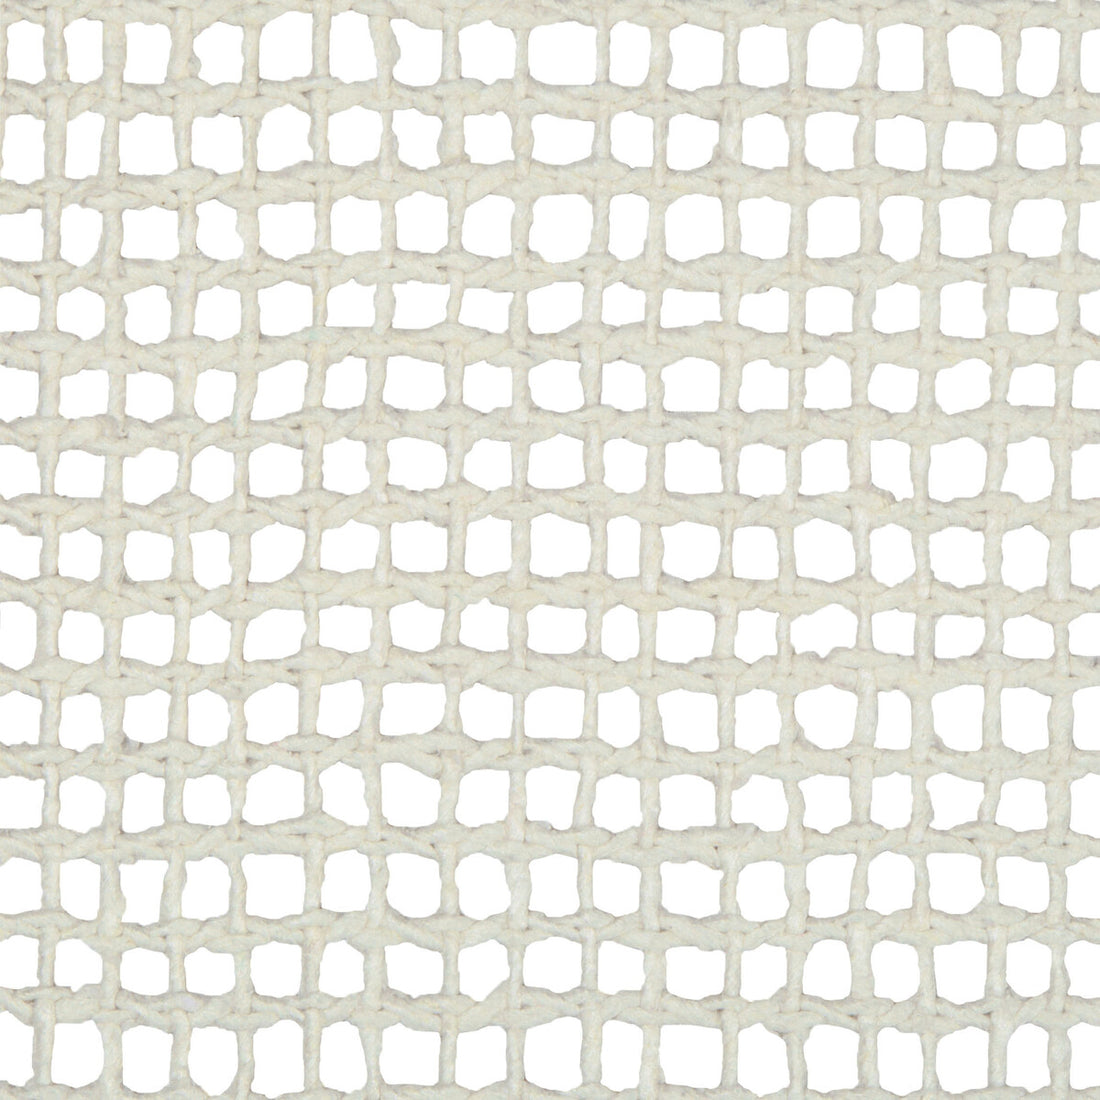 Lachman fabric in oyster color - pattern 4499.1.0 - by Kravet Basics in the Jeffrey Alan Marks Oceanview collection